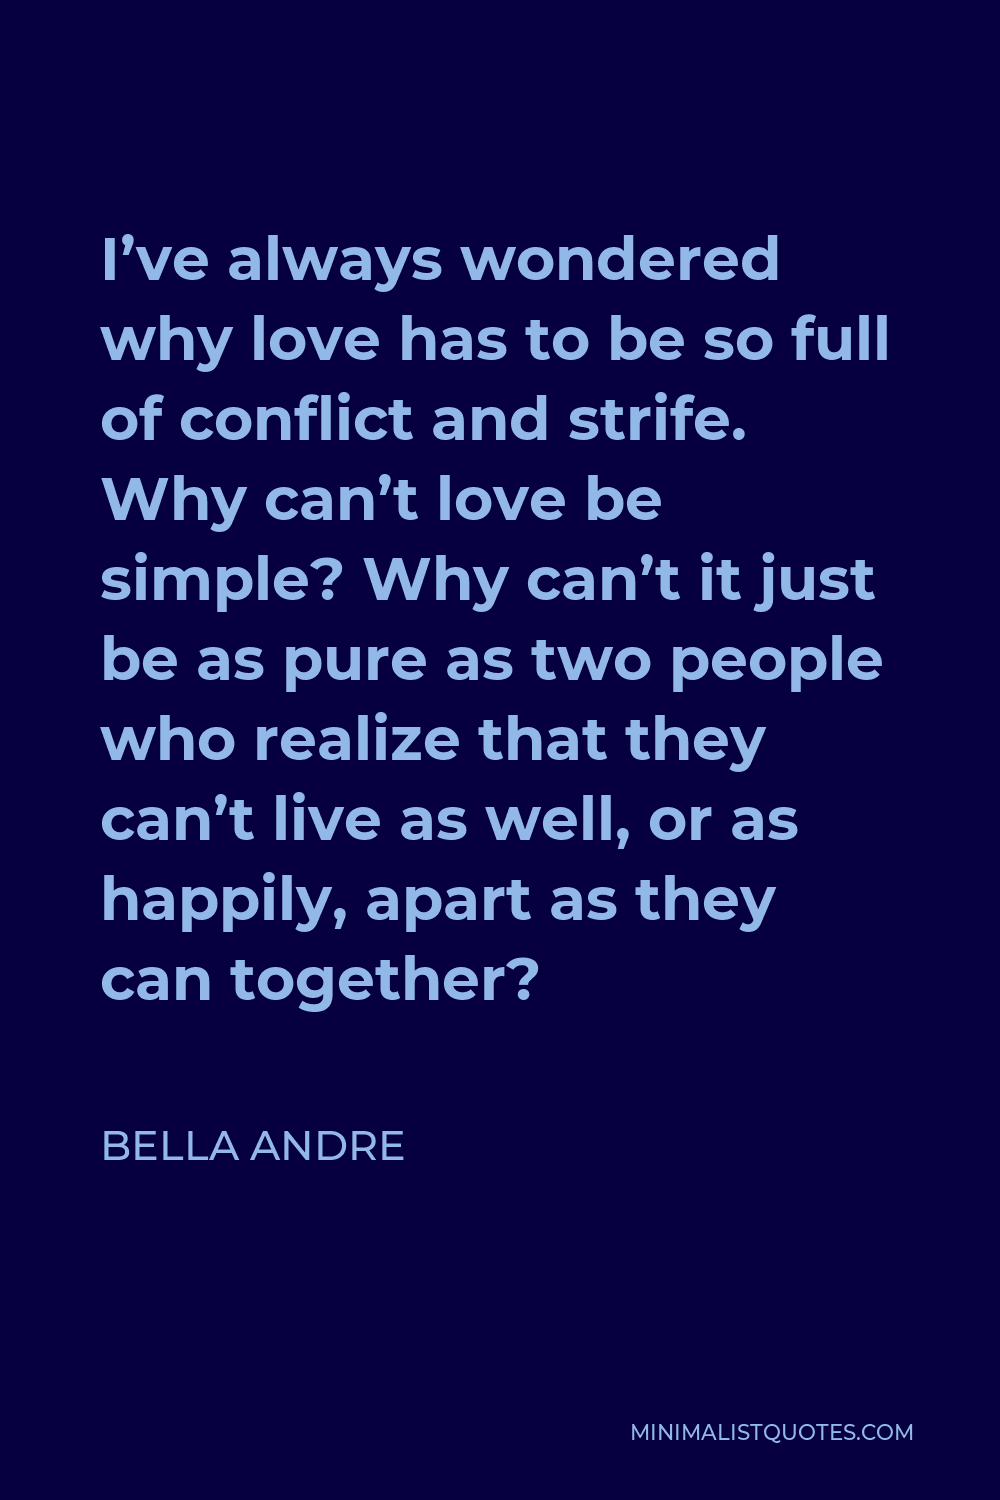 Bella Andre Quote - I’ve always wondered why love has to be so full of conflict and strife. Why can’t love be simple? Why can’t it just be as pure as two people who realize that they can’t live as well, or as happily, apart as they can together?